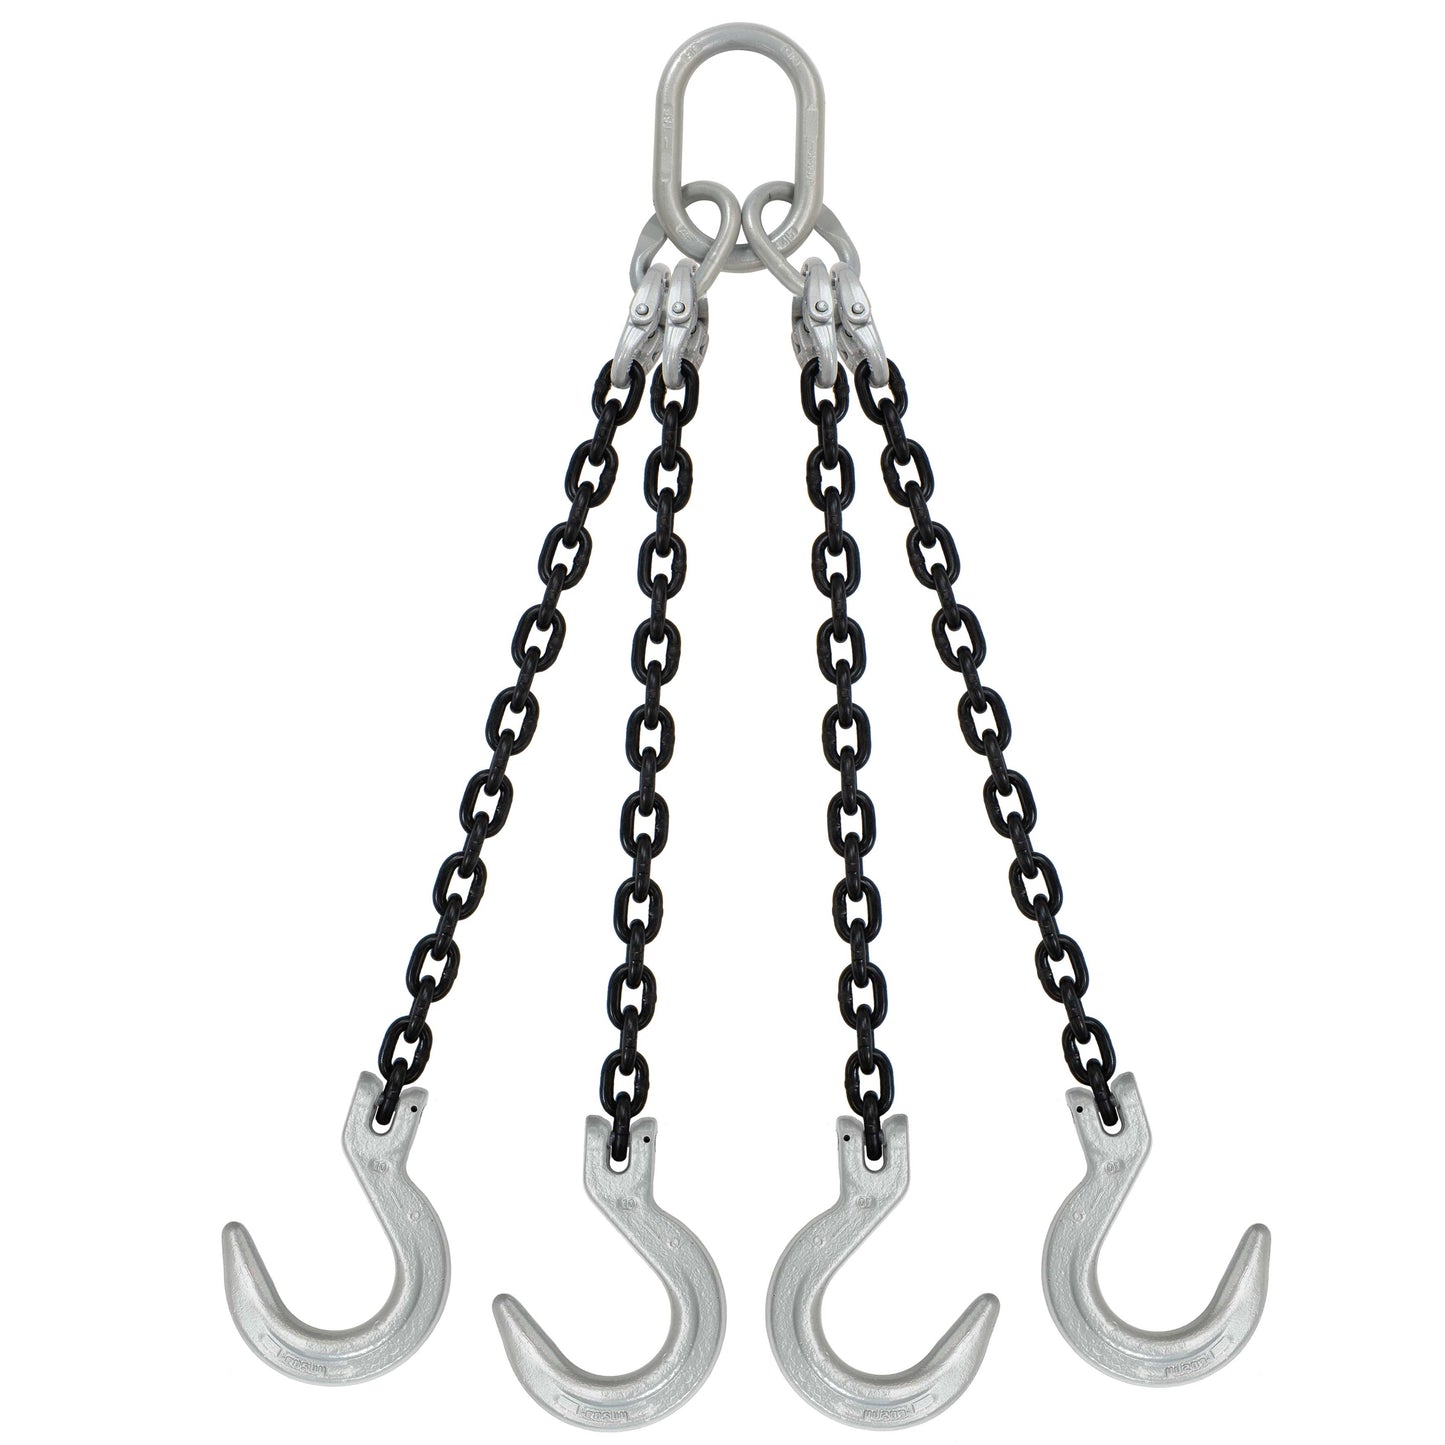 932 inch x 6 foot Domestic 4 Leg Chain Sling w Crosby Foundry Hooks Grade 100 image 1 of 2